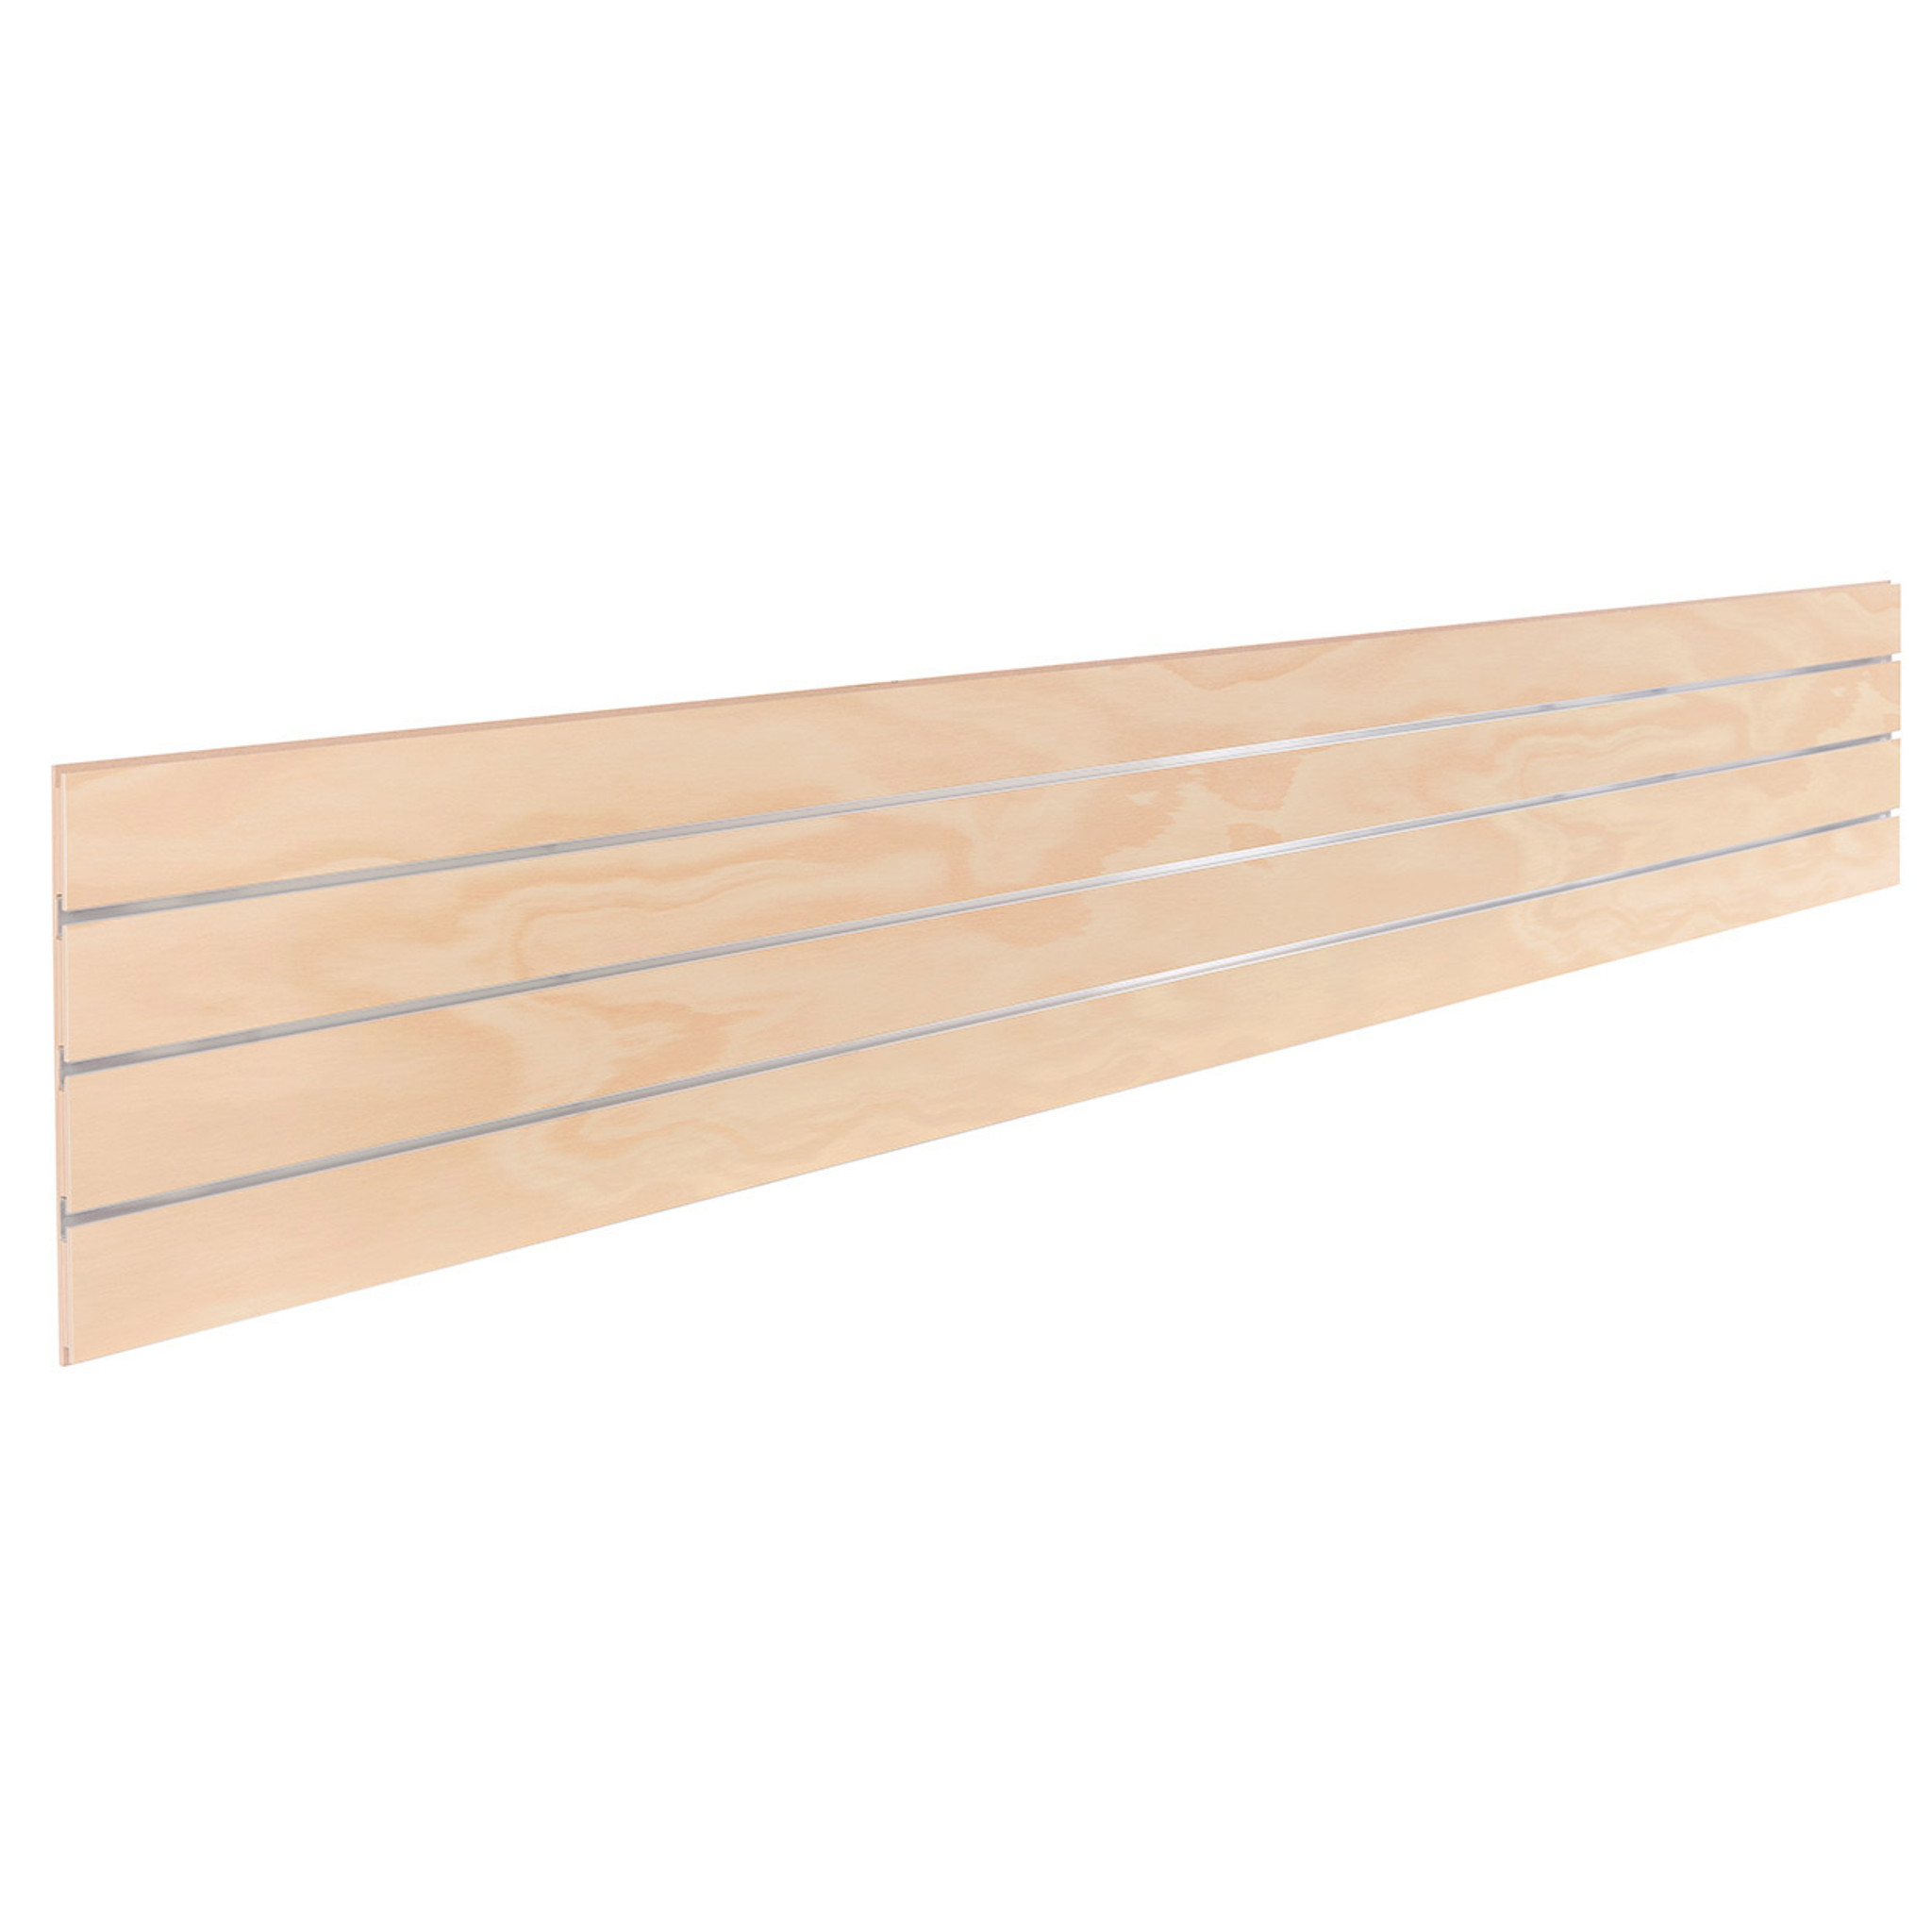 Slatwall timber laminate centre plank with 3 inserts 2400 L x 400 H x ...